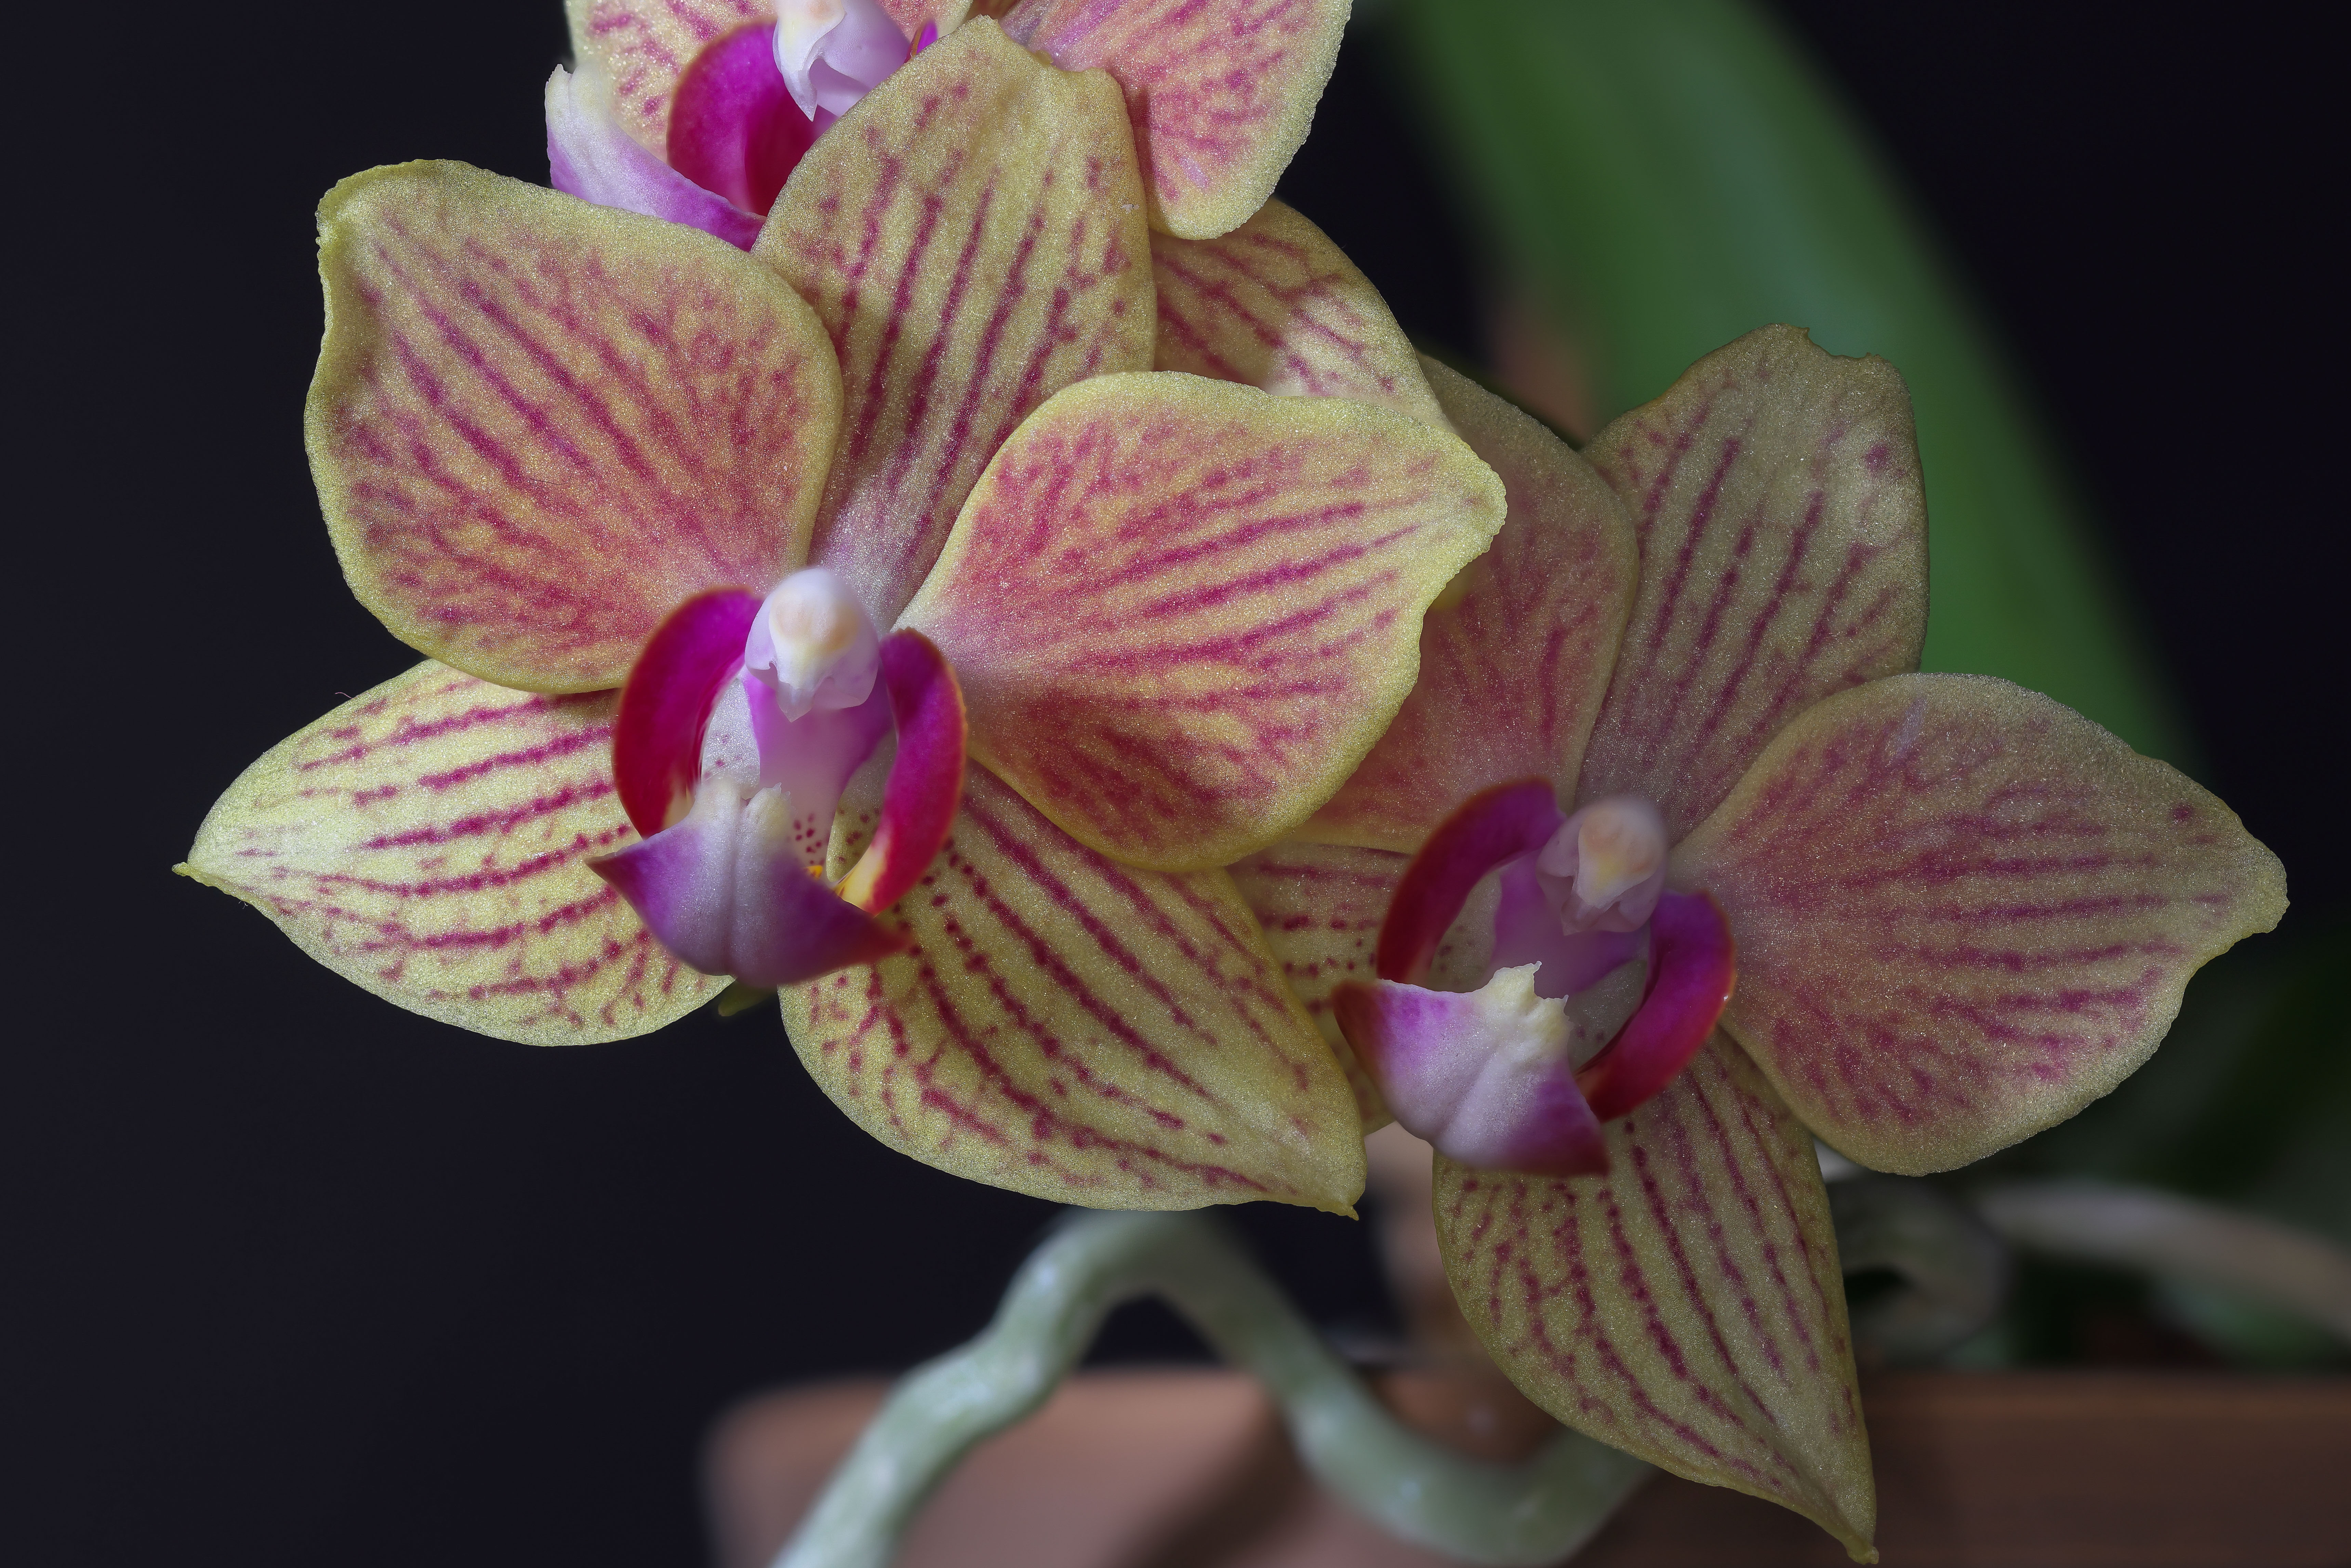 orchid DPP stacked_lowres-3317.jpg